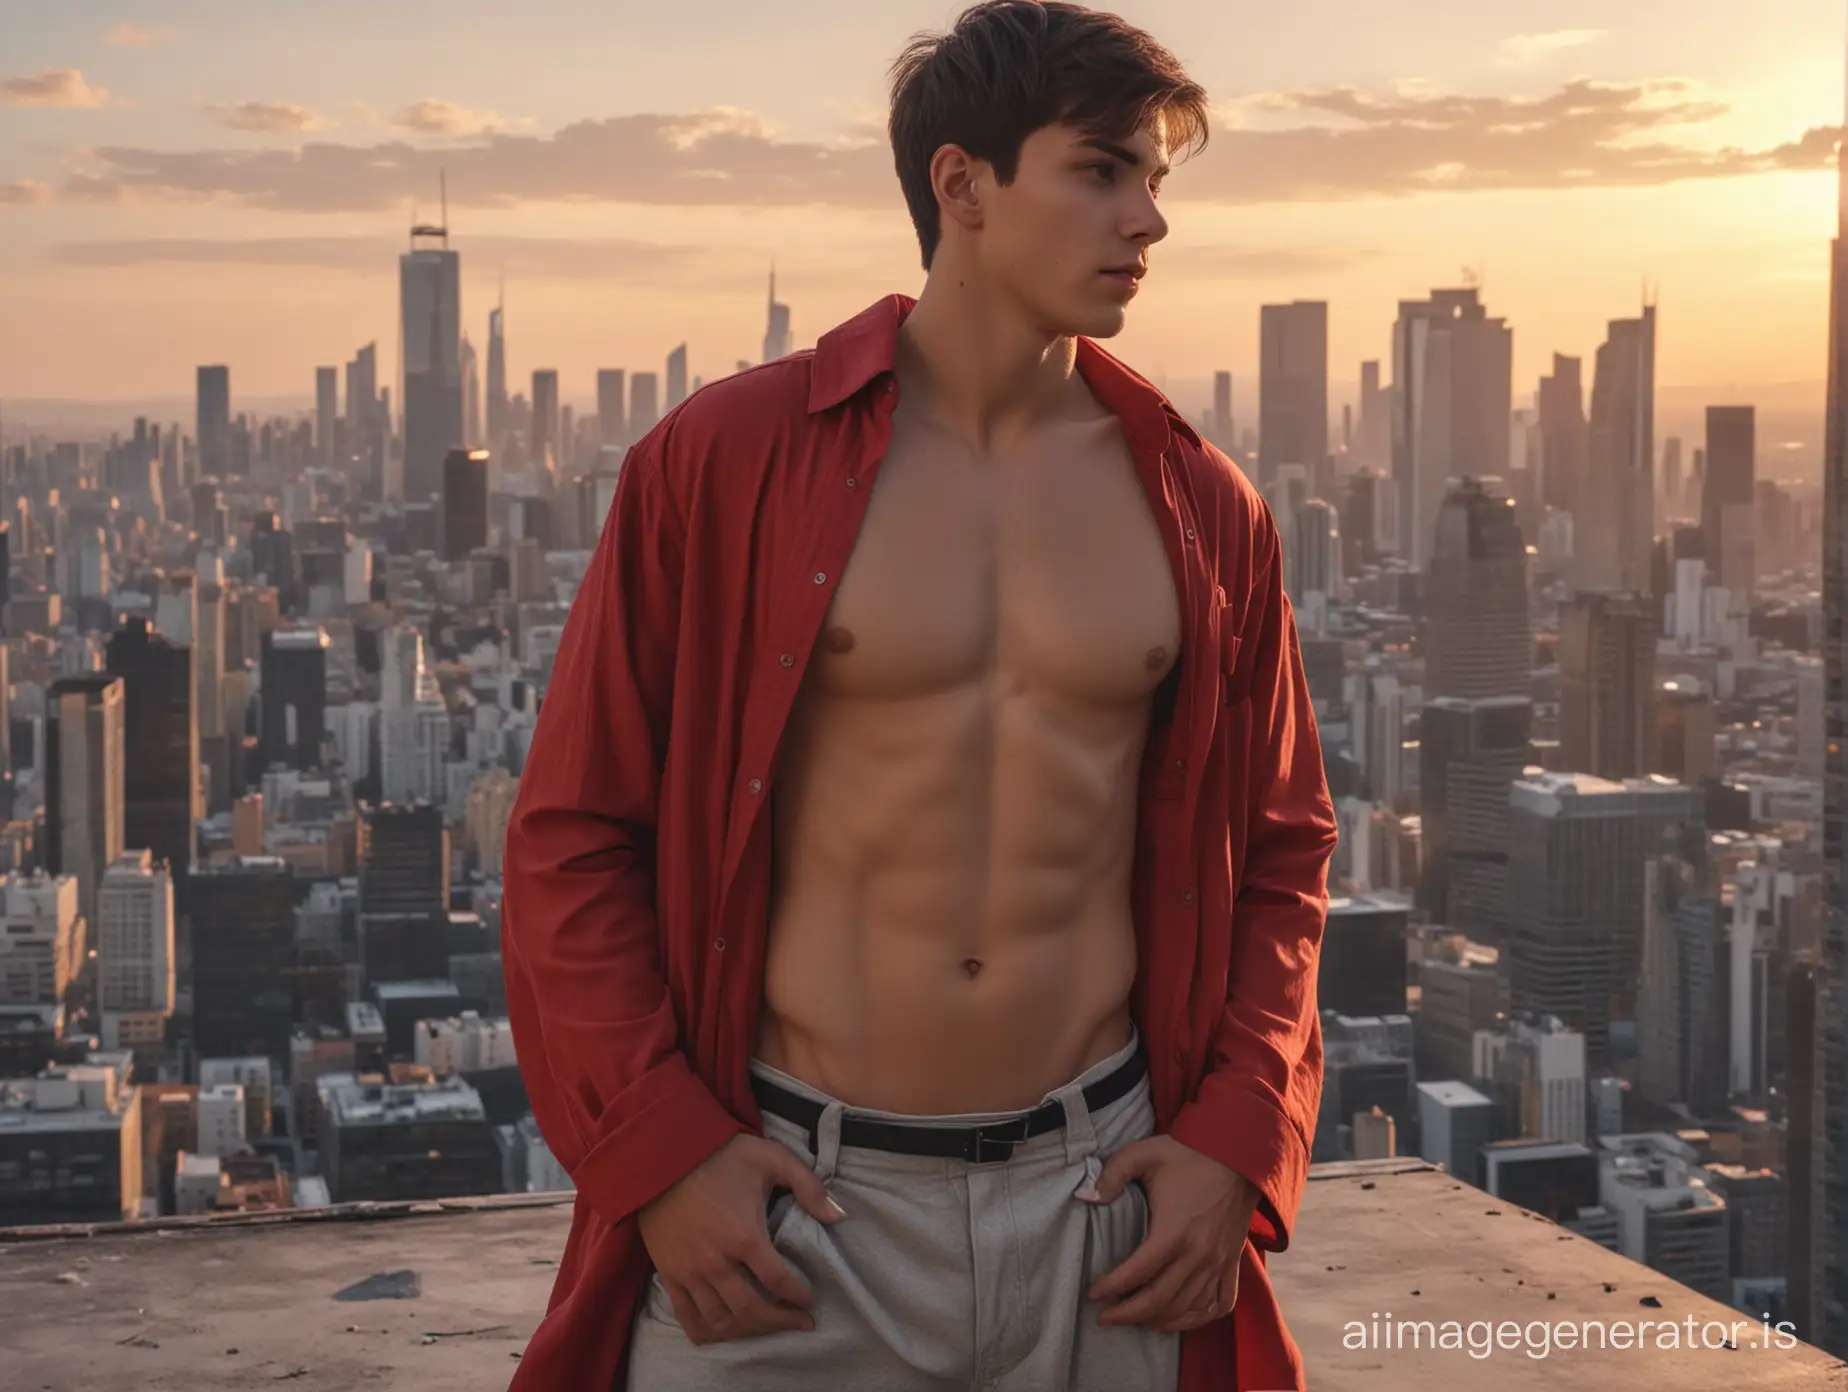 Teen-Boy-in-Red-Oversize-Shirt-Posing-on-Skyscraper-Rooftop-at-Sunset